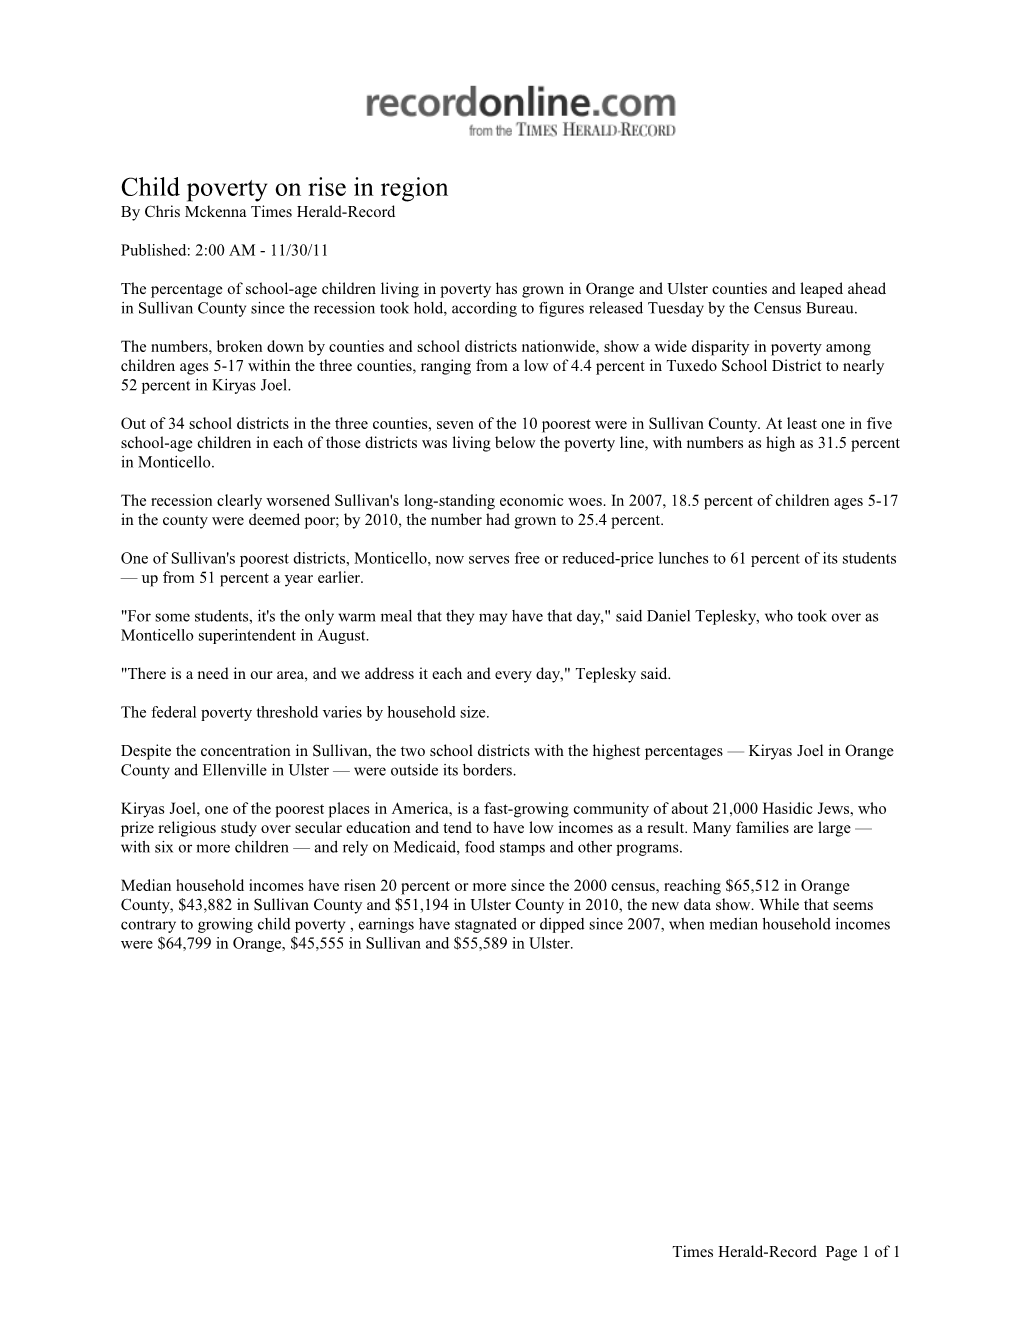 Child Poverty on Rise in Region